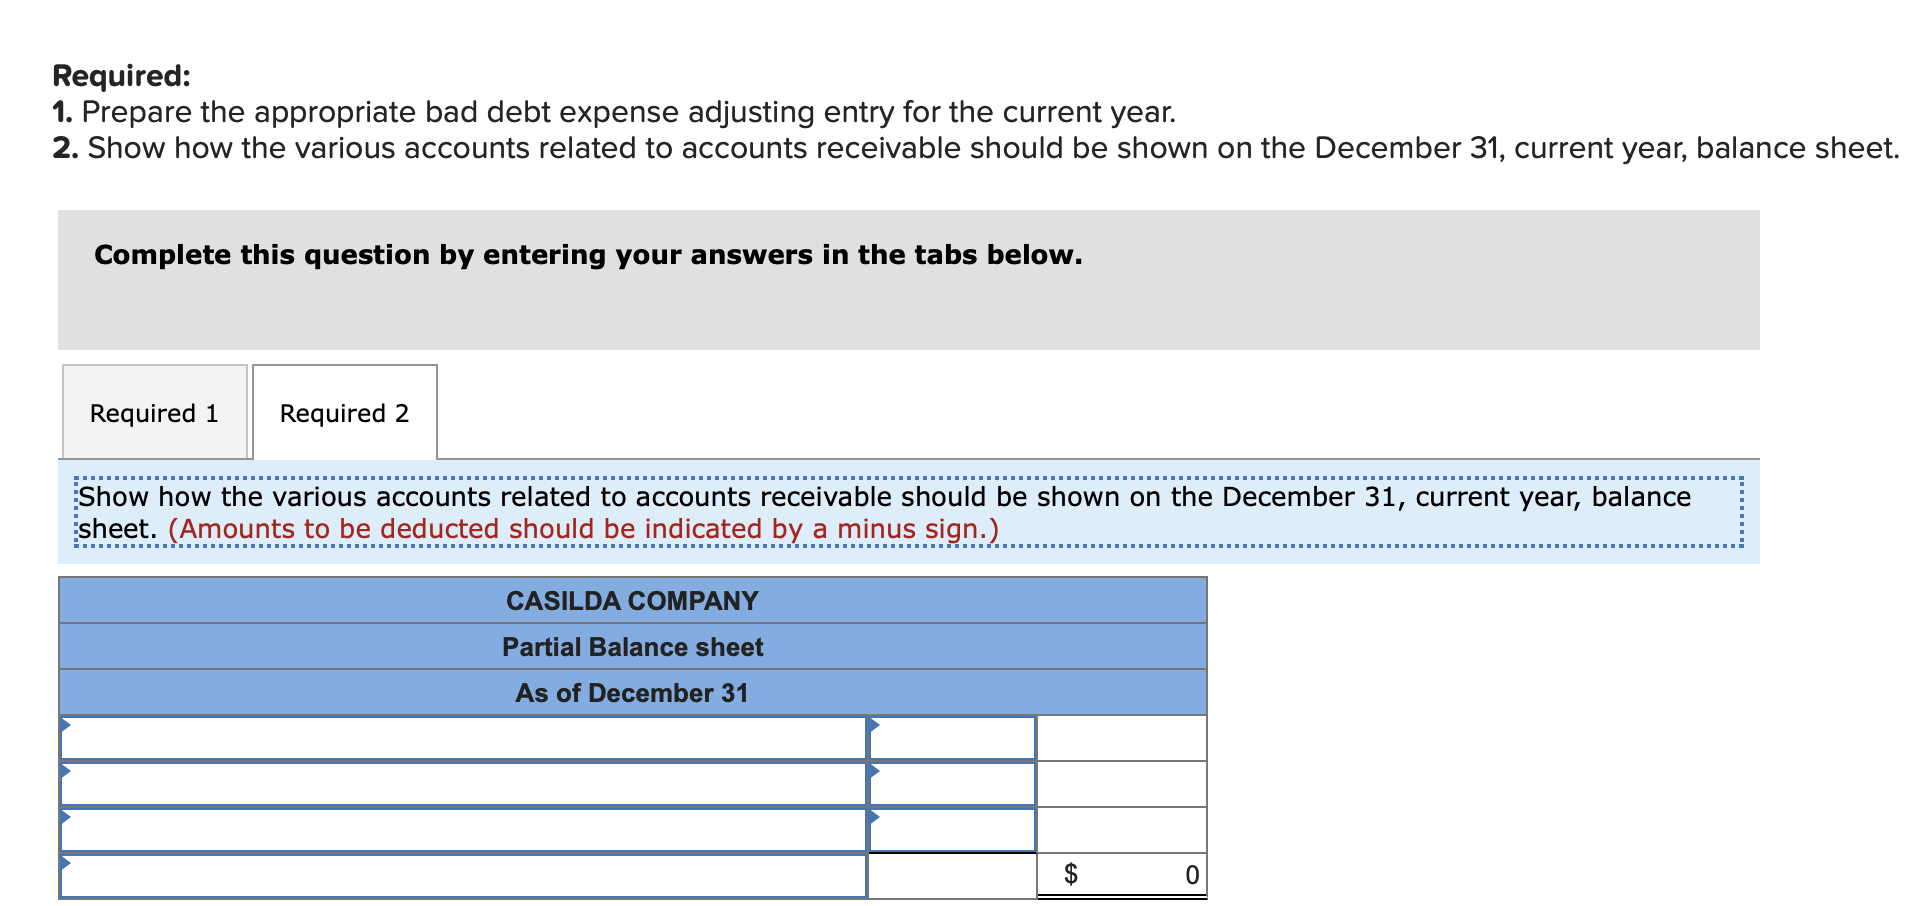 Required:
1. Prepare the appropriate bad debt expense adjusting entry for the current year.
2. Show how the various accounts related to accounts receivable should be shown on the December 31, current year, balance sheet
Complete this question by entering your answers in the tabs below.
Required 1
Required 2
Show how the various accounts related to accounts receivable should be shown on the December 31, current year, balance
sheet. (Amounts to be deducted should be indicated by a minus sign.)
CASILDA COMPANY
Partial Balance sheet
As of December 31
$
0
